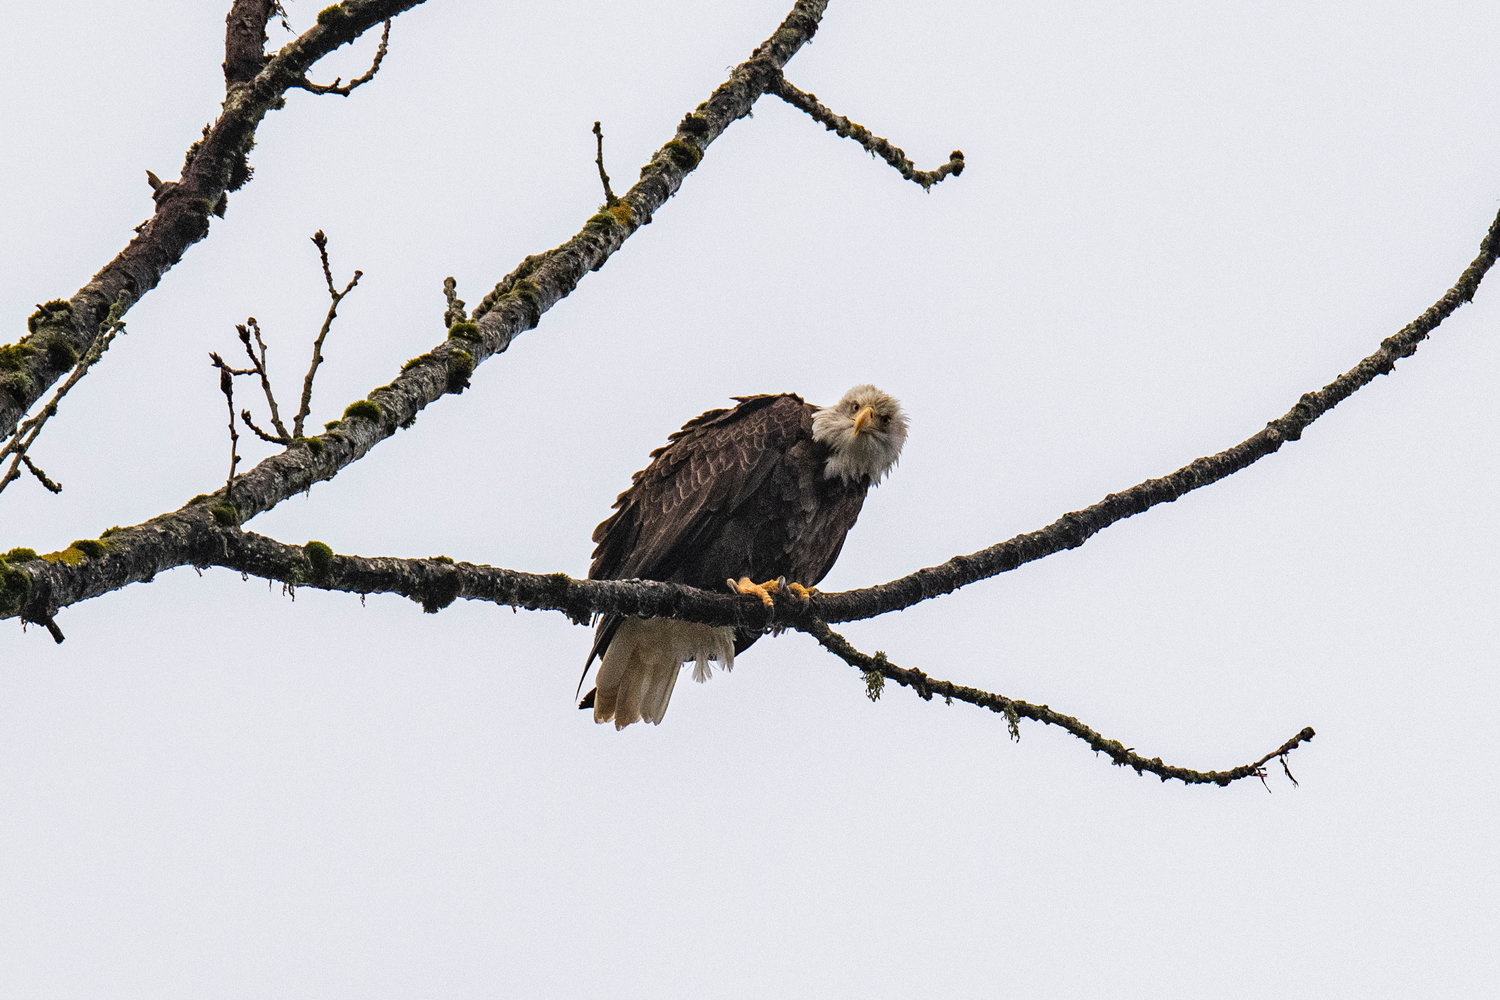 Perched above the Newaukum River in Chehalis on Saturday, a bald eagle glances down toward the camera with an intense glare.